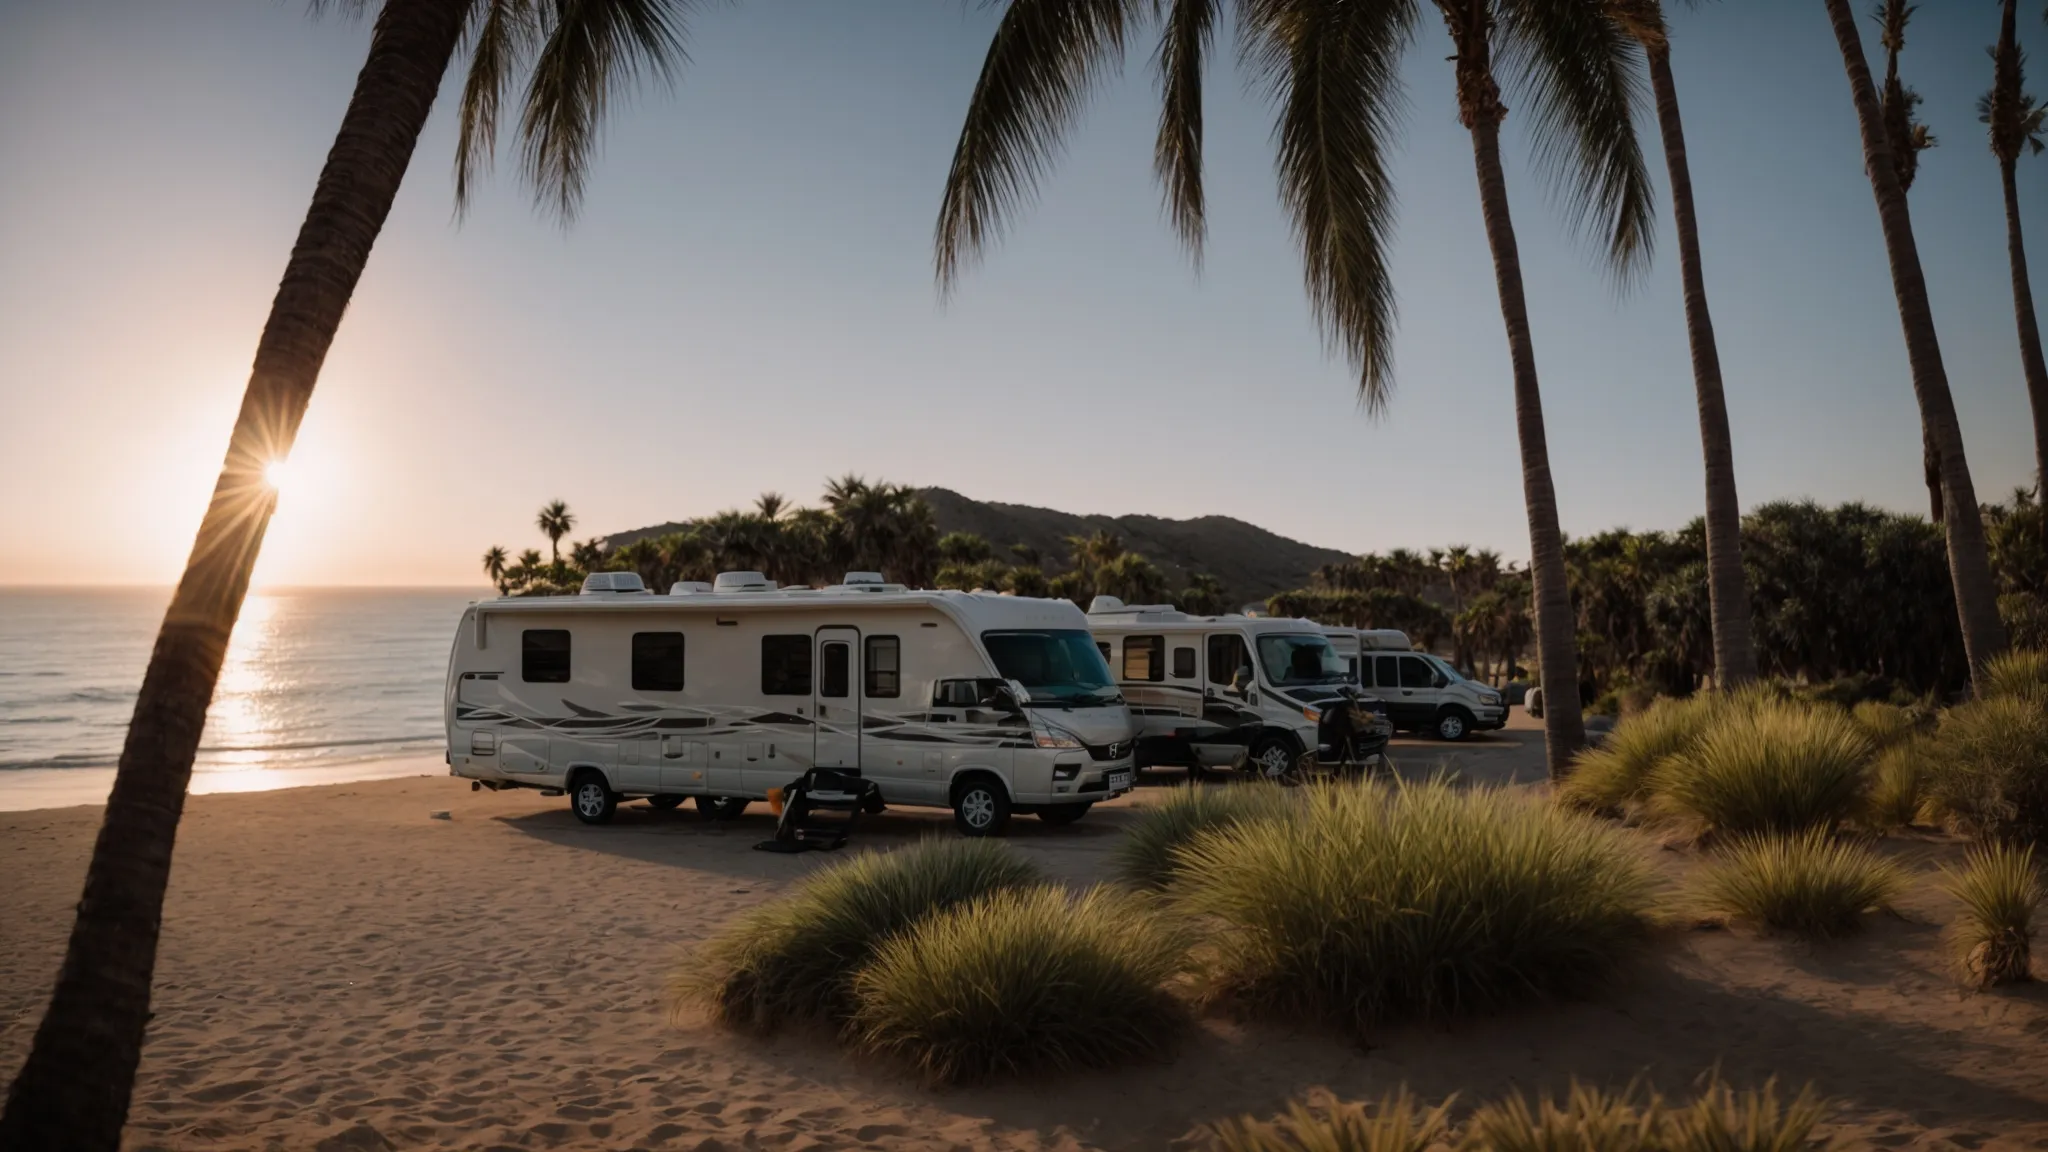 a serene view of rvs parked amidst palm trees with the sun setting over the calm pacific coastline.